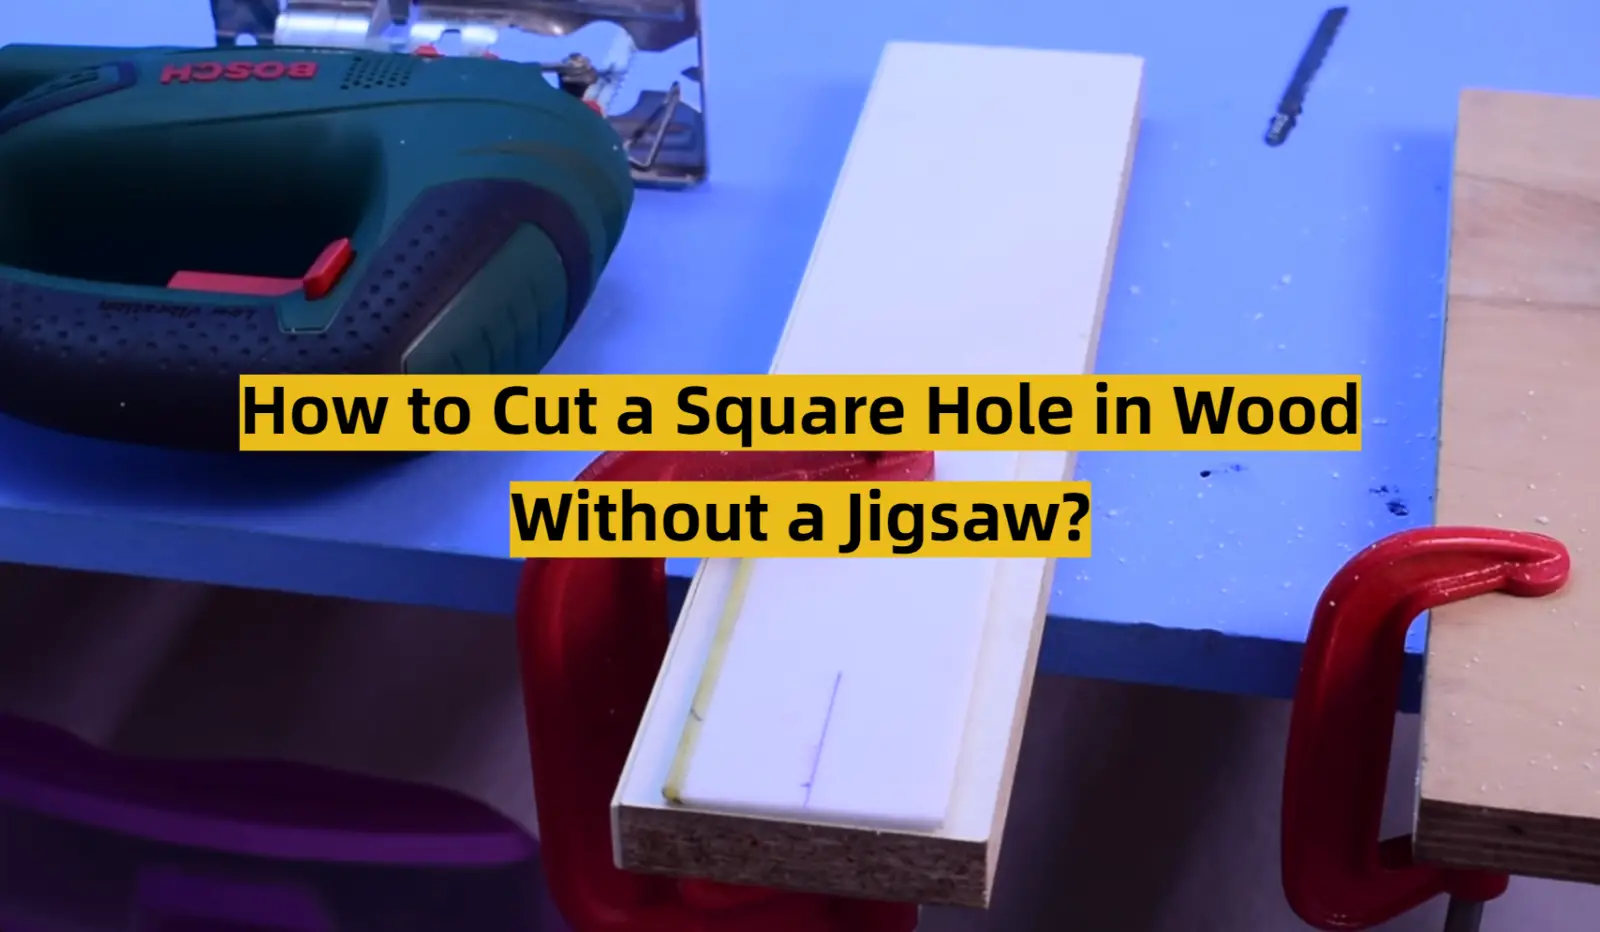 How to Cut a Square Hole in Wood Without a Jigsaw?